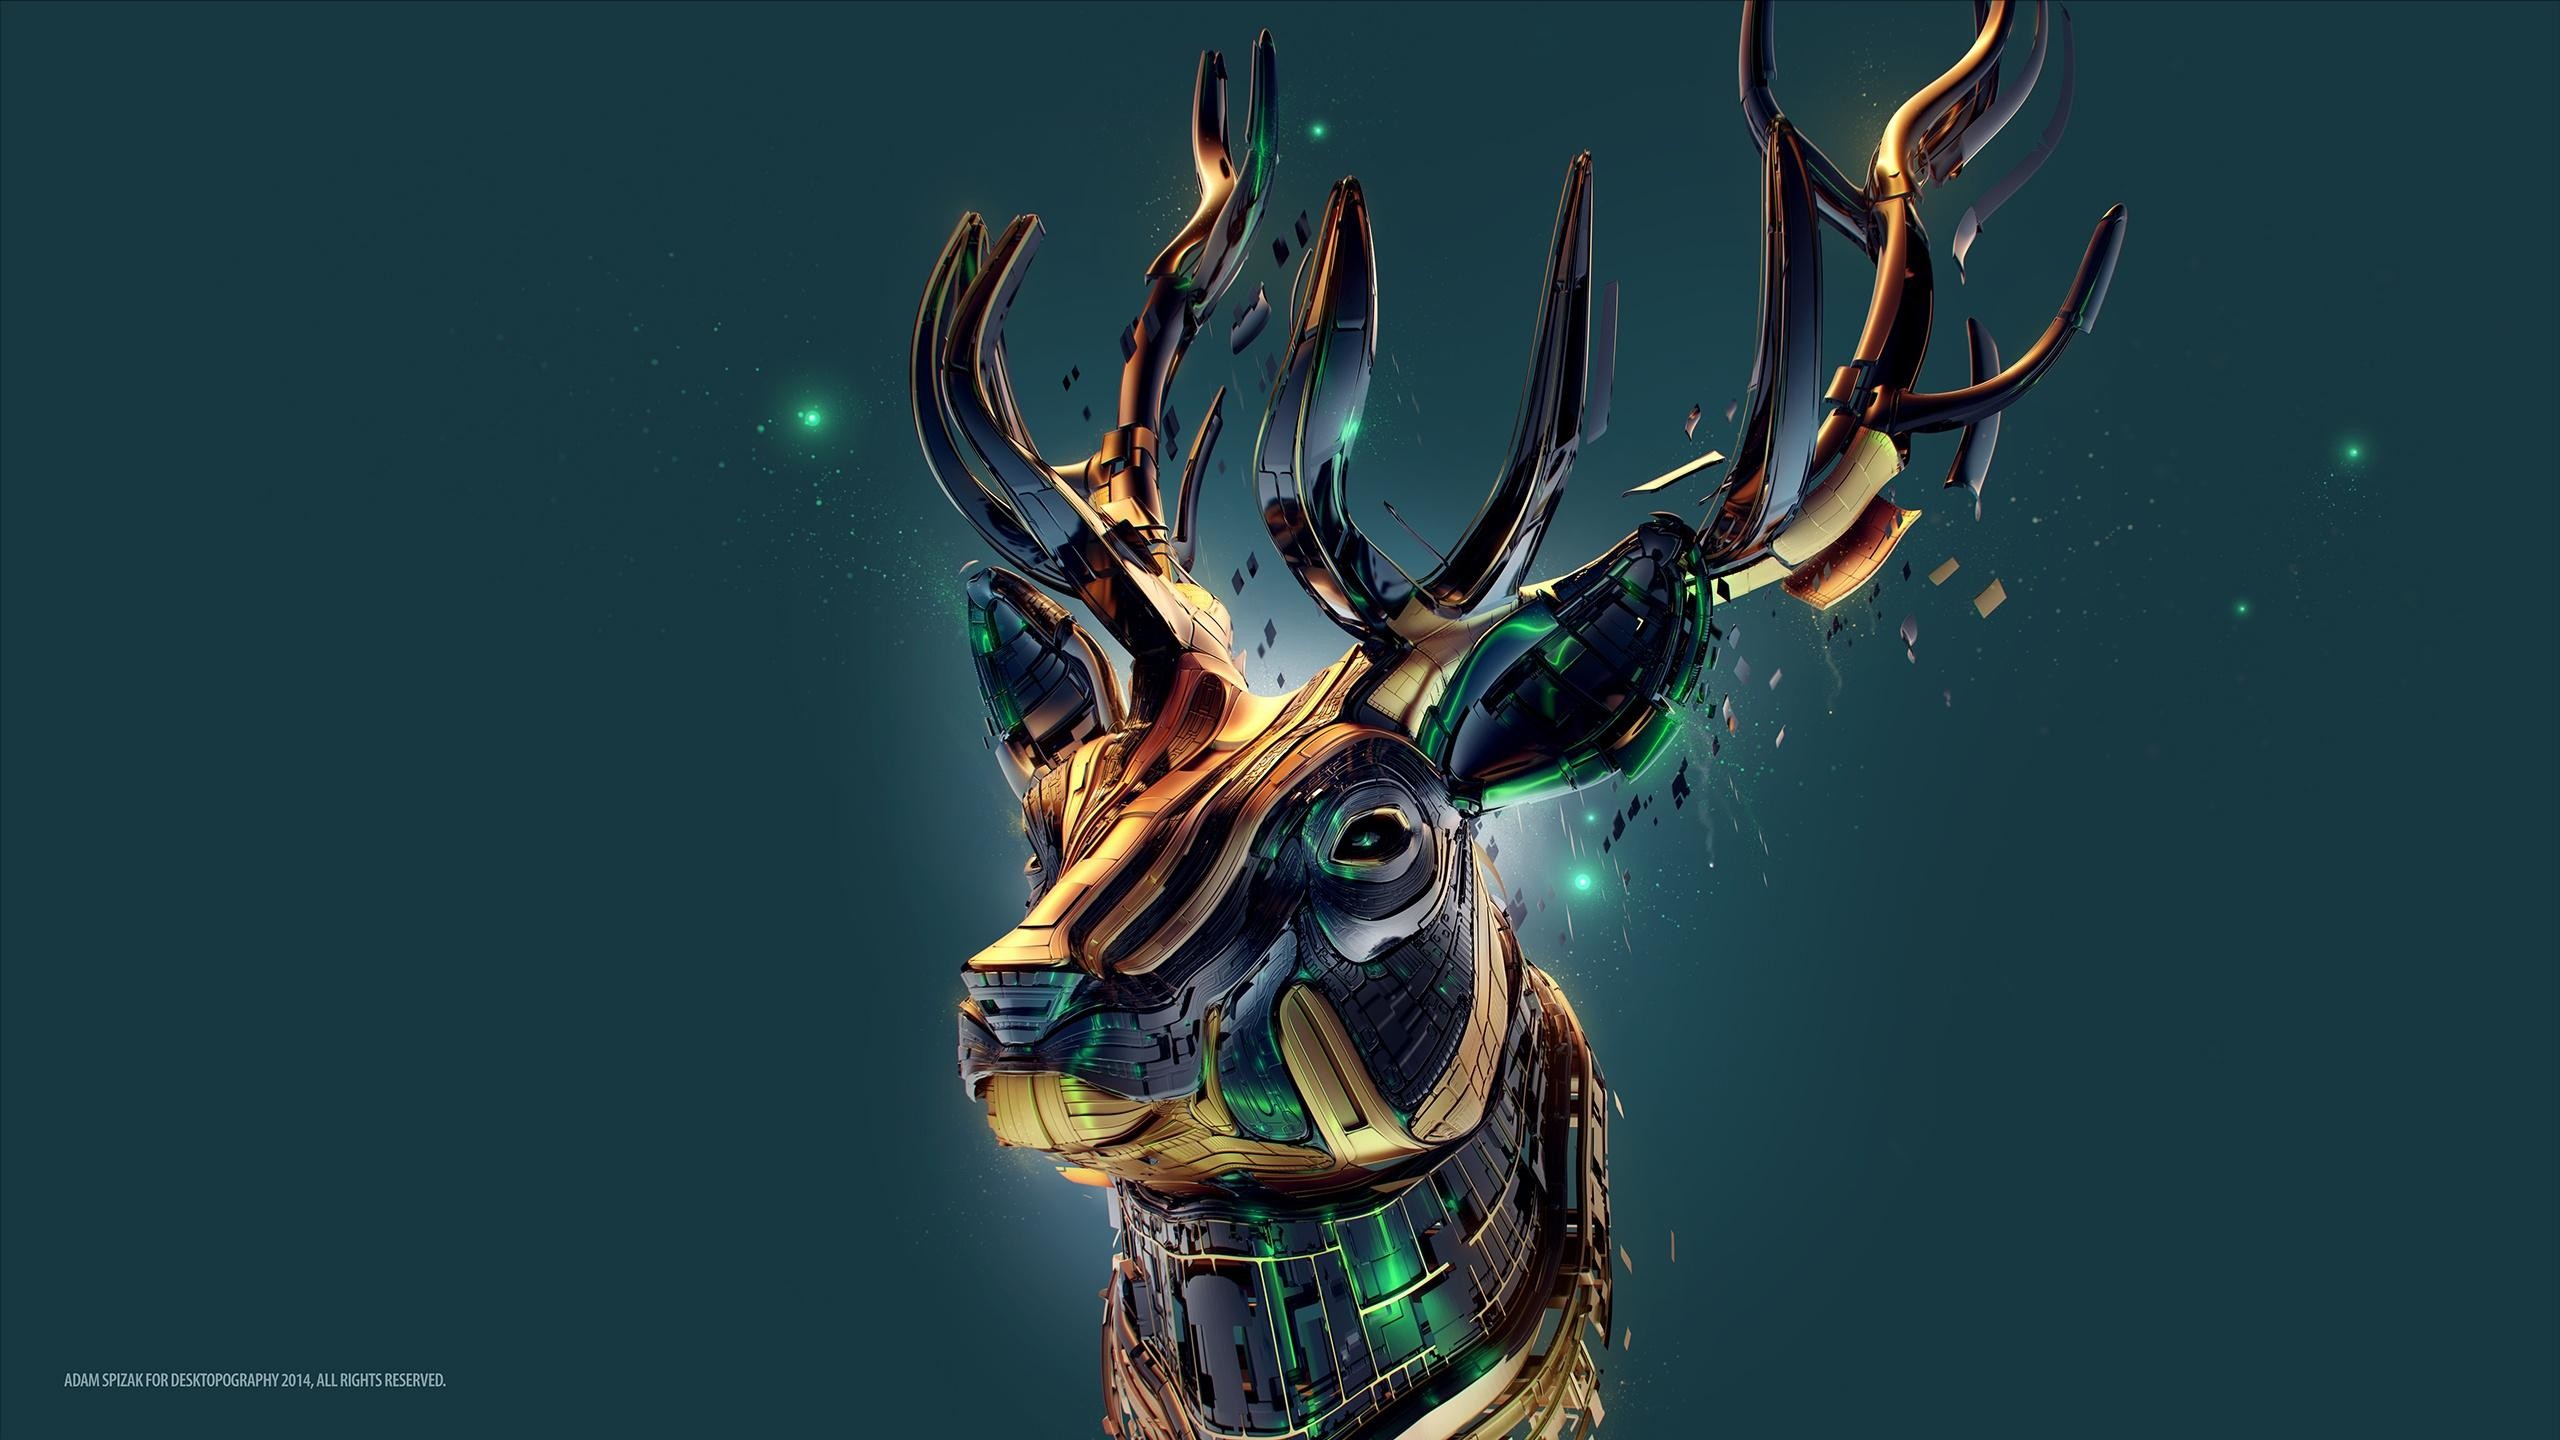 Deer 4k ultra hd 16:10 wallpapers hd, desktop backgrounds 3840x2400, images  and pictures